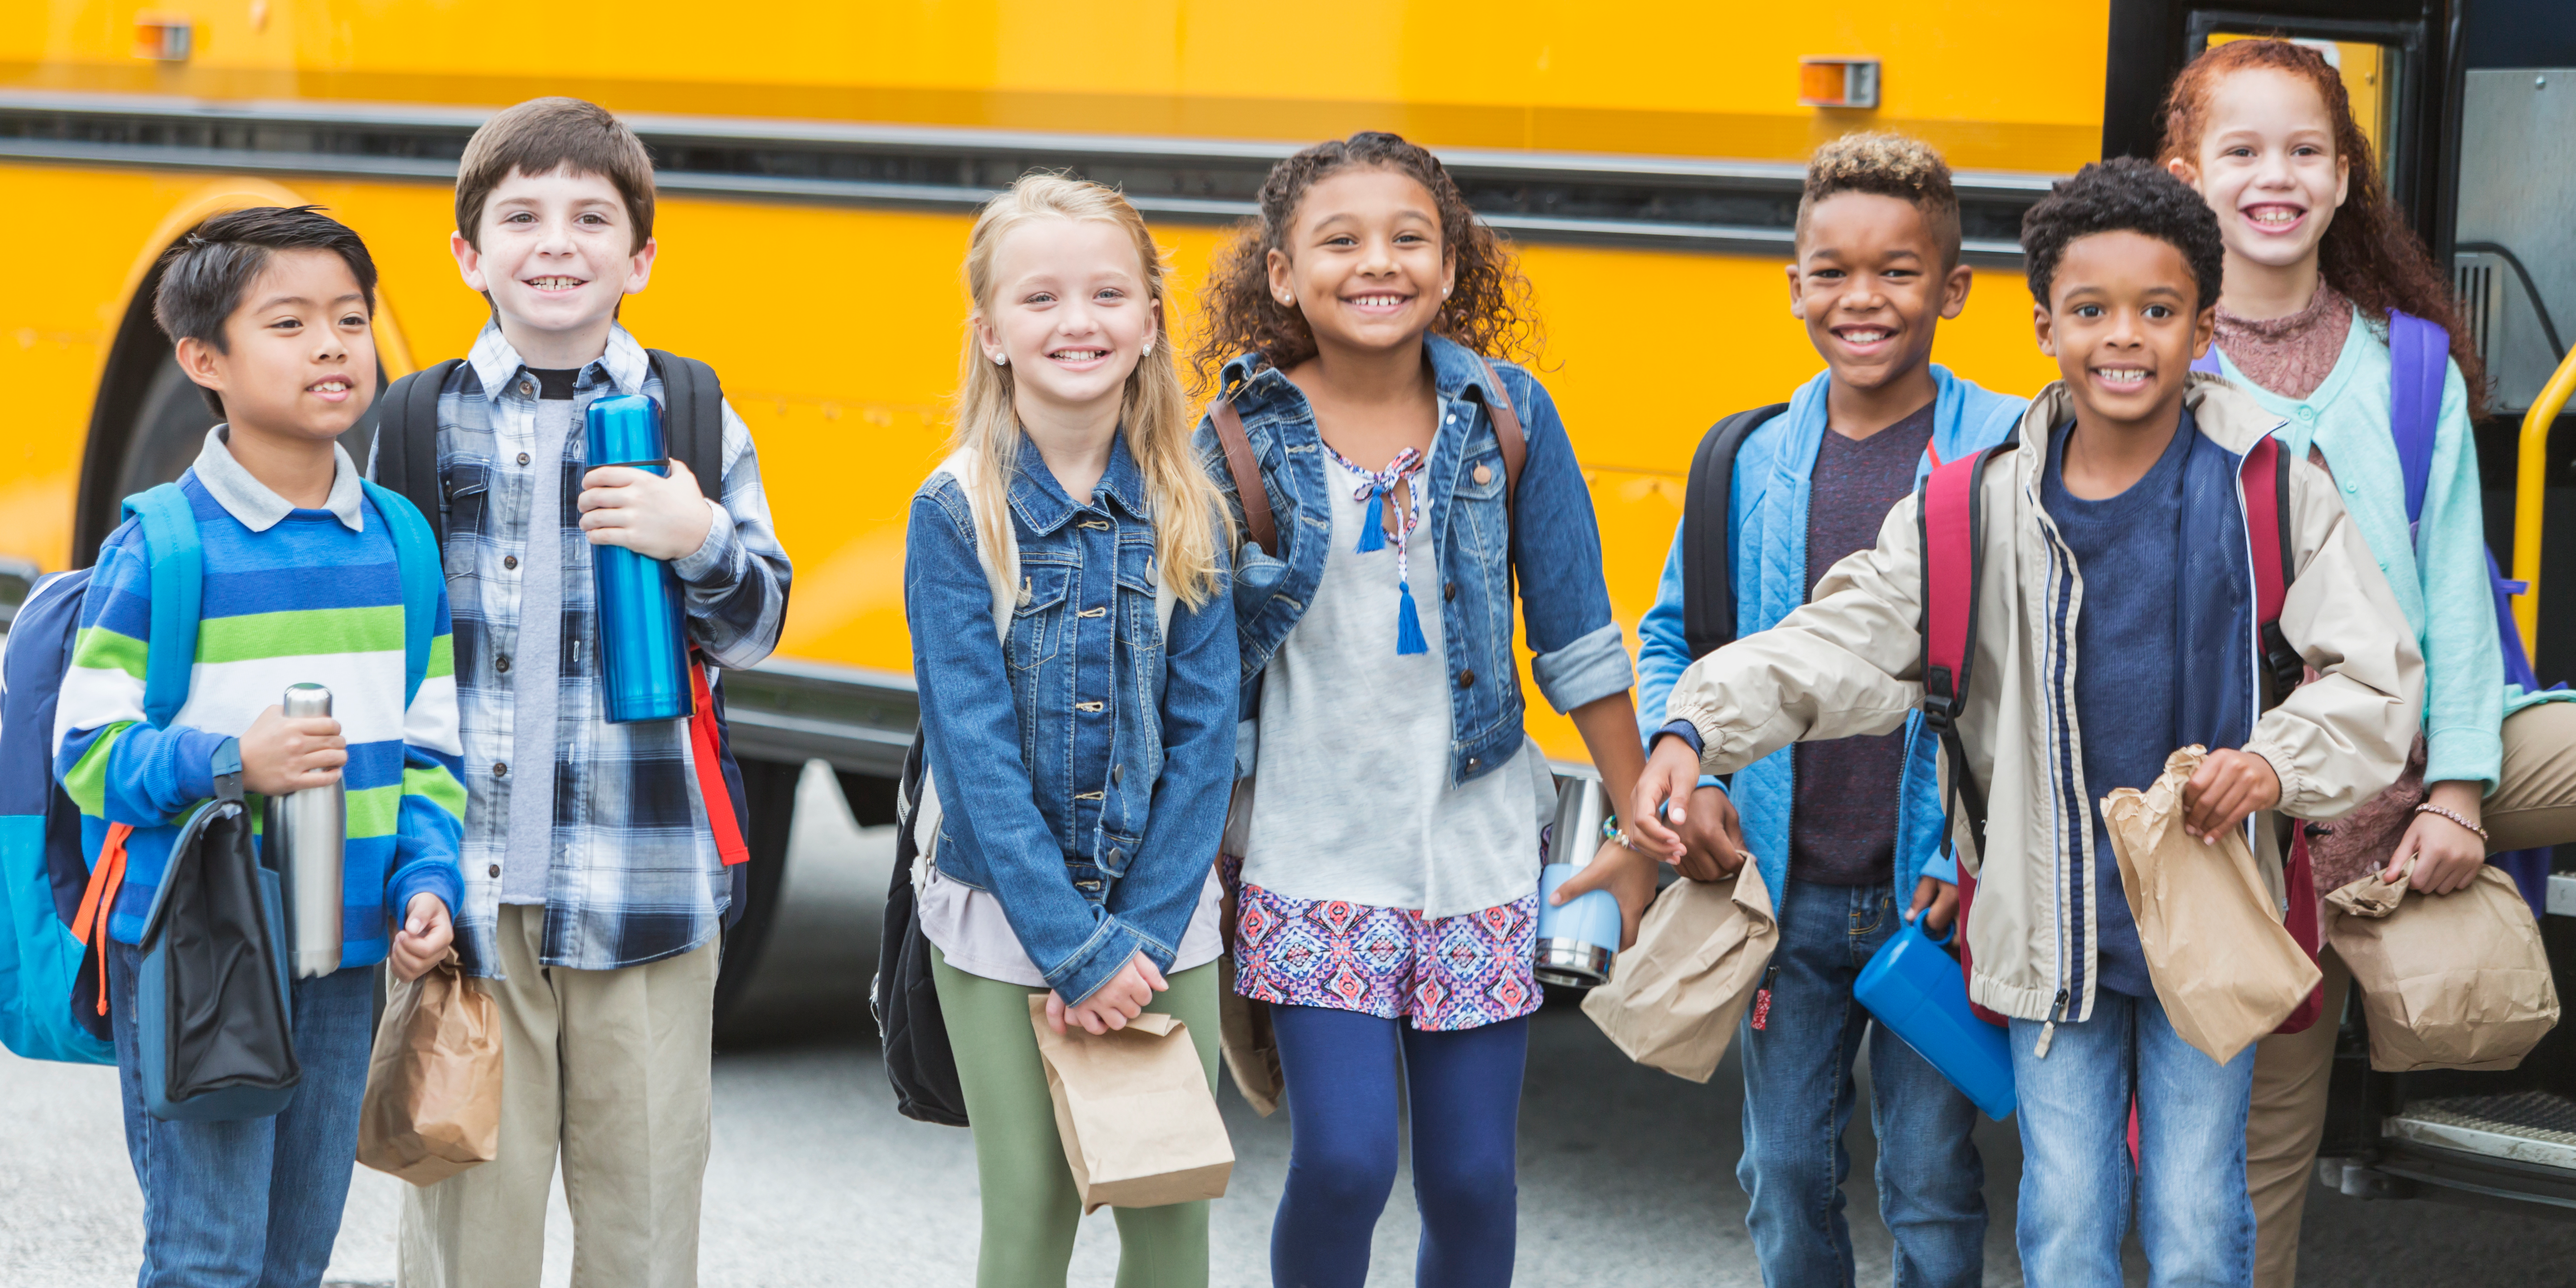 Elementary school children standing in front of a bus.